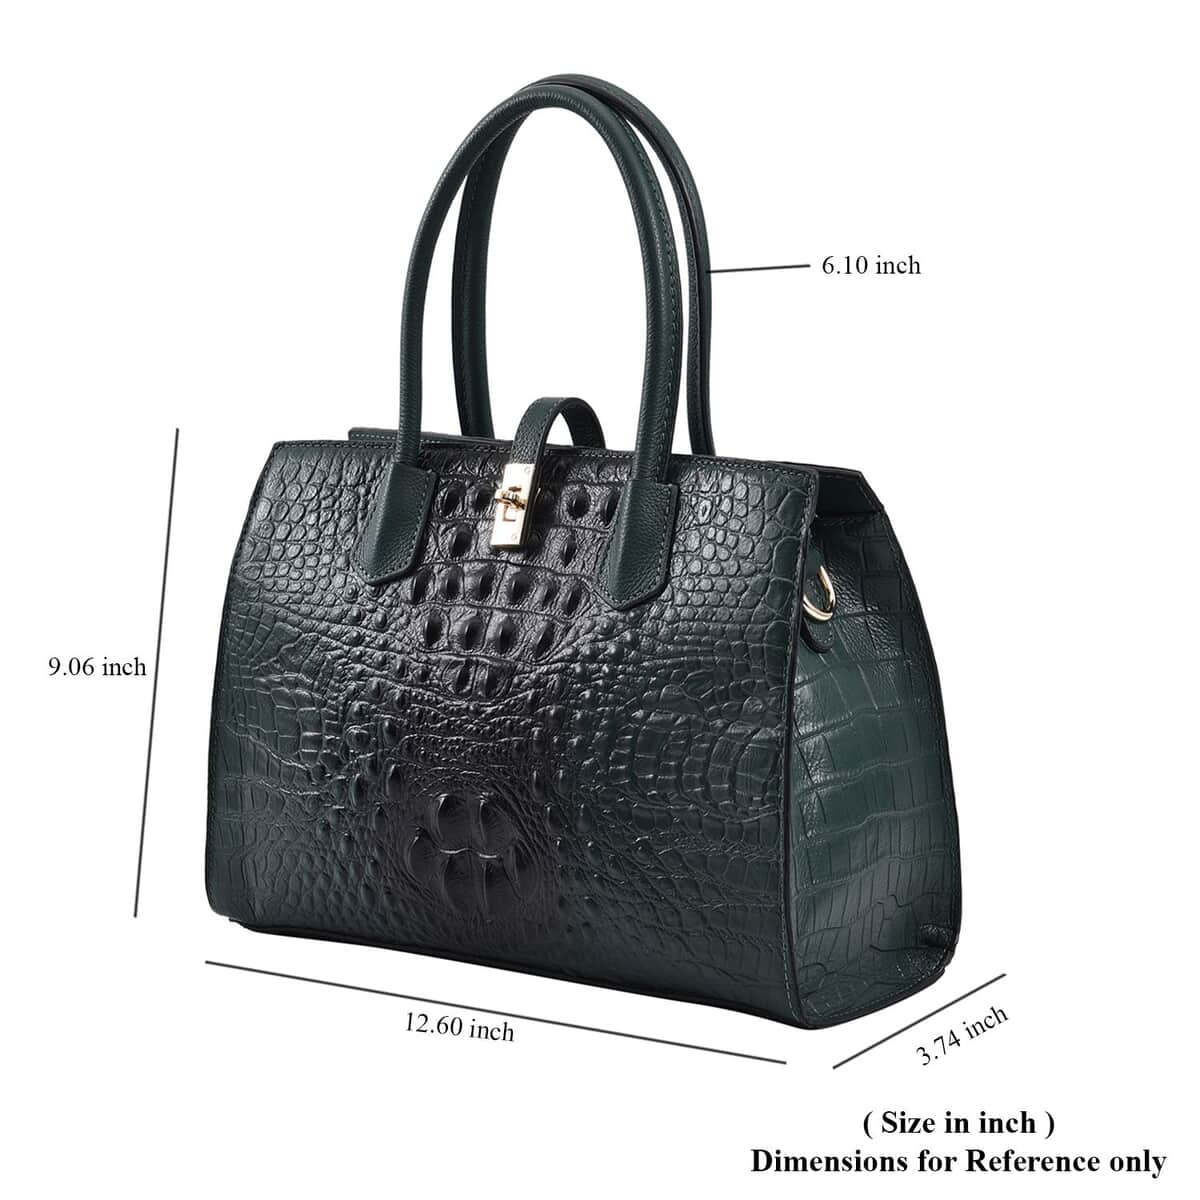 THE MONACO Dark Green with Black Genuine Leather Croc Embossed Convertible Tote Bag with Detachable Long Strap (12.60''x3.74''x9.06'') image number 6